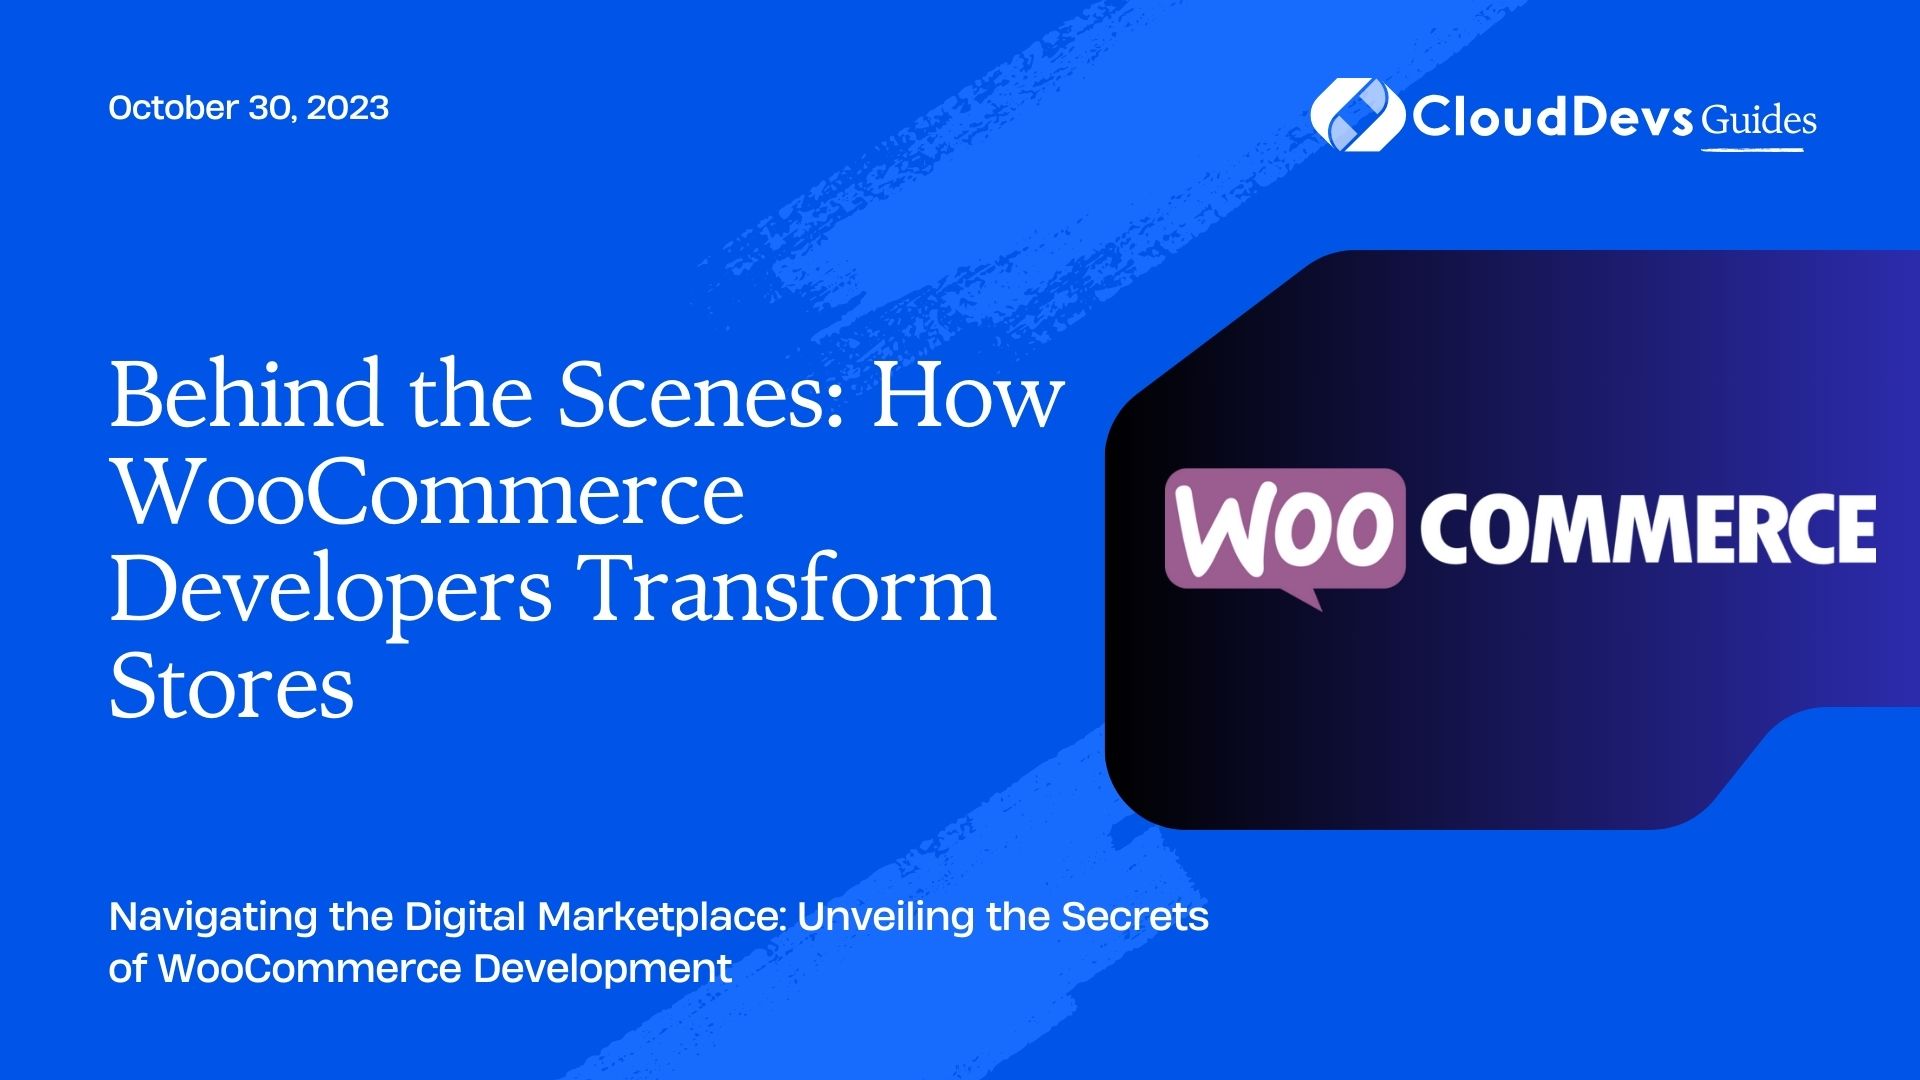 Behind the Scenes: How WooCommerce Developers Transform Stores